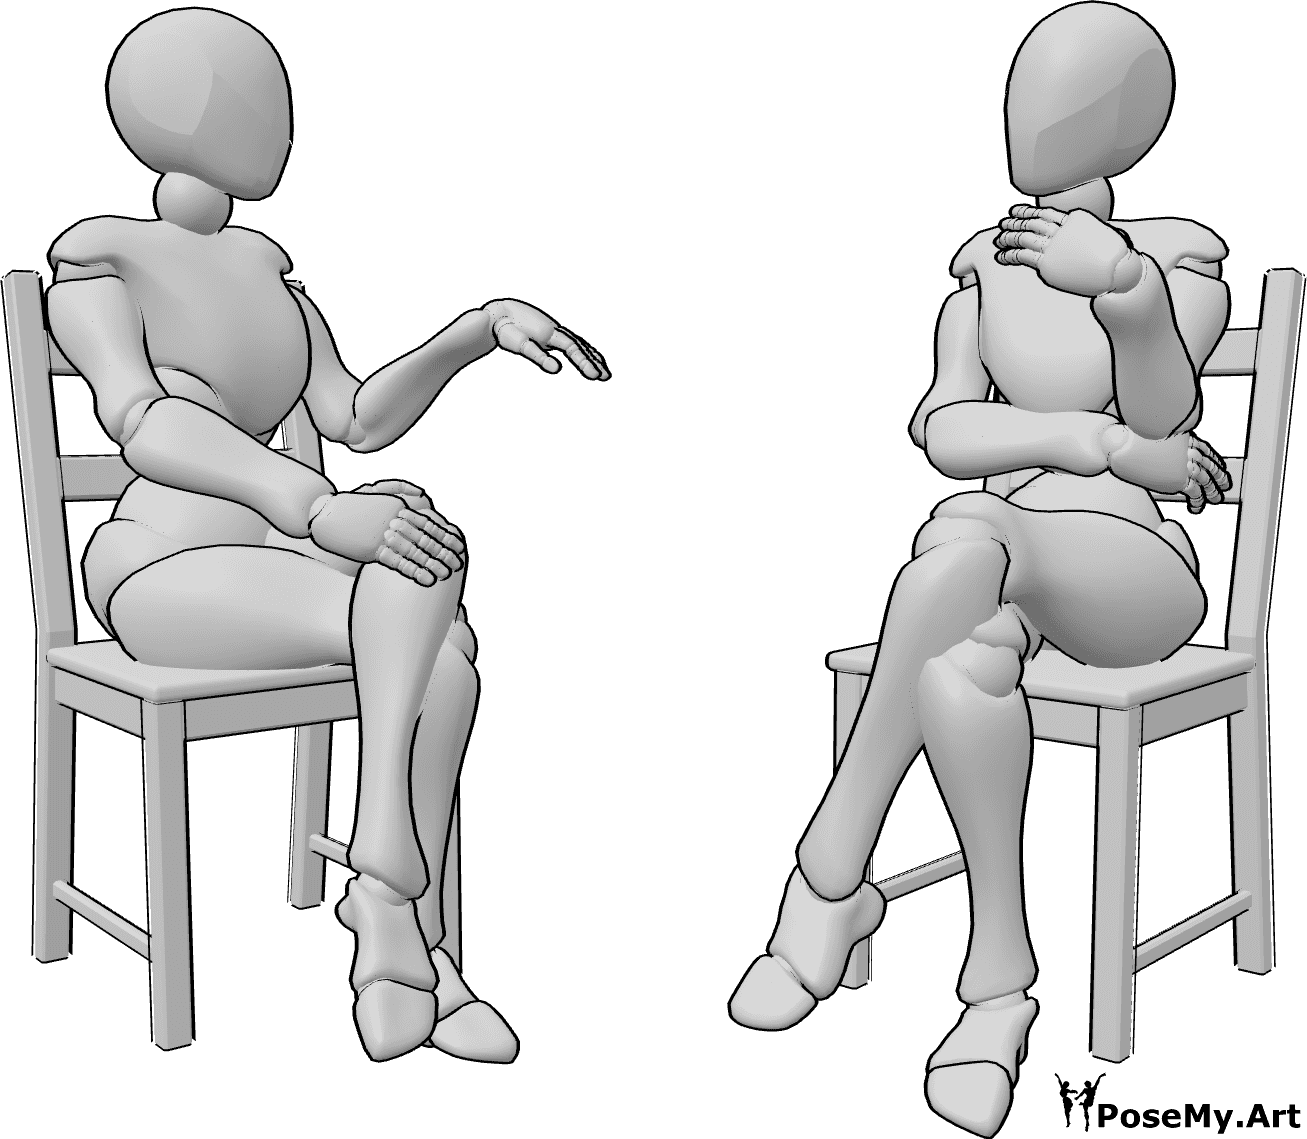 Pose Reference - Two females gossiping conversation pose - Two females are sitting on chairs and talking, gossiping, having a conversation